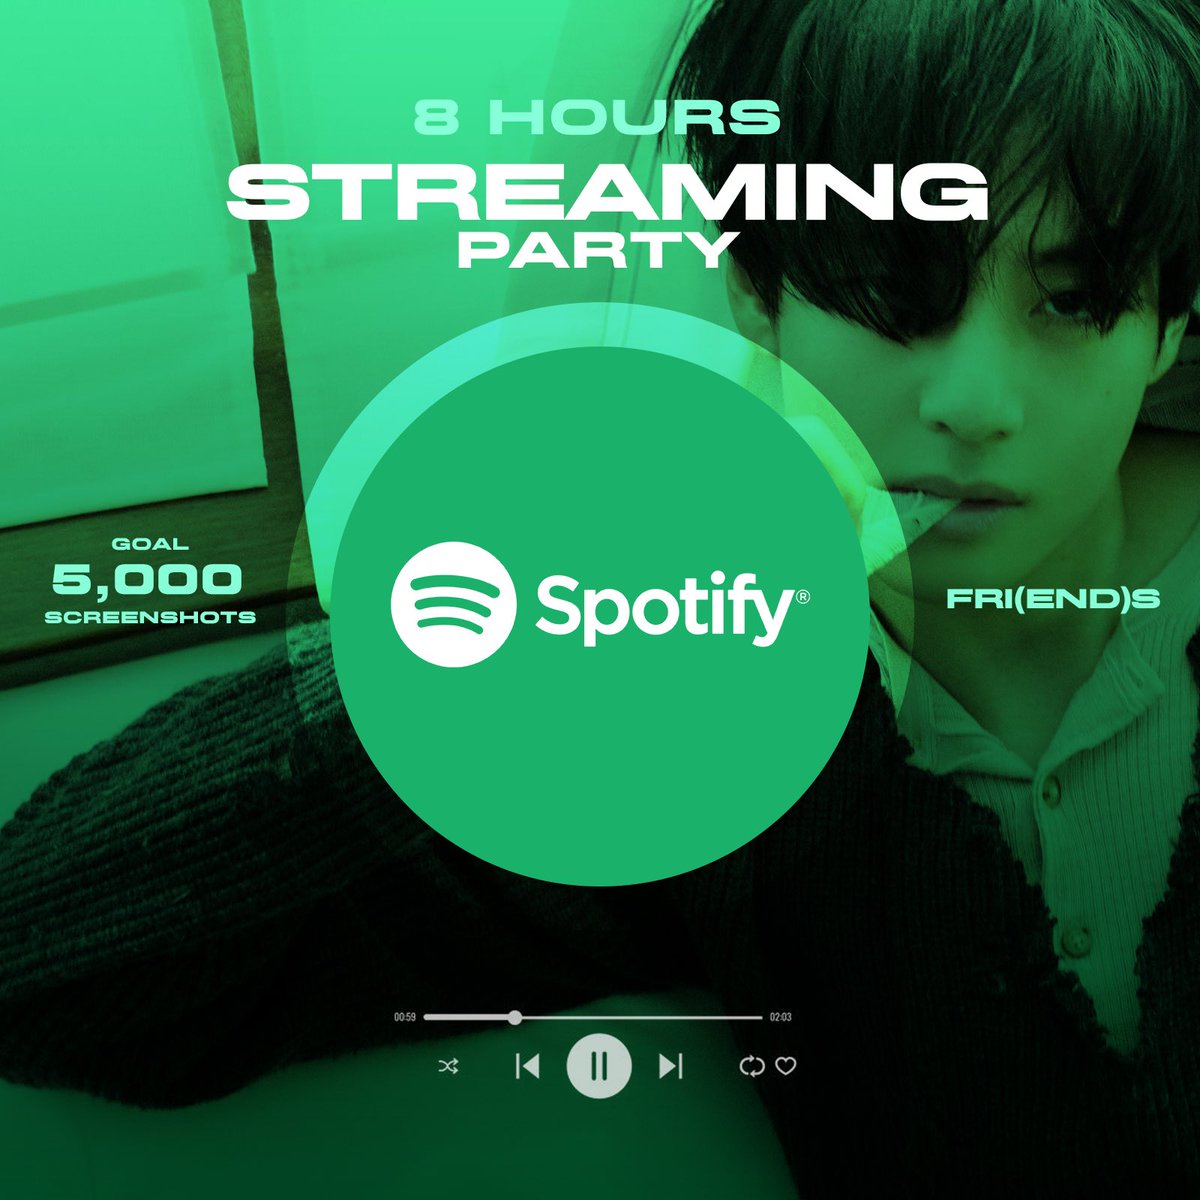 Let’s not drop tomorrow. Can we get 5000 streaming screenshots of FRIENDS + LMA in 6 hours? Targeted goal to be achieved in: 8 hours Targeted goal to see an increase on charts should be achieved in: 6 hours LETS BE FRIENDS